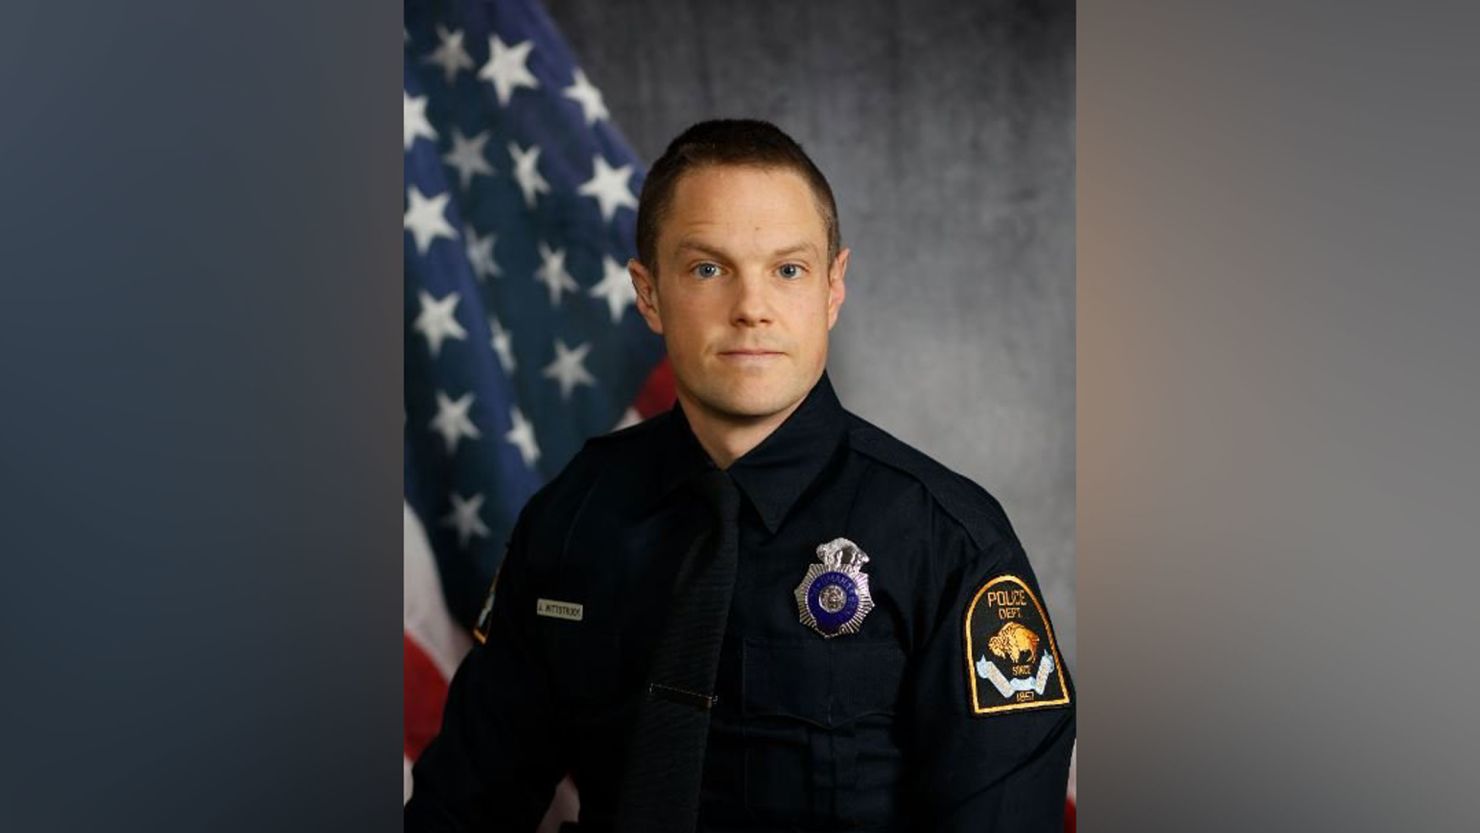 Omaha Police Department Officer Jeffrey Wittstruck was shot four times while responding to a shoplifting call.